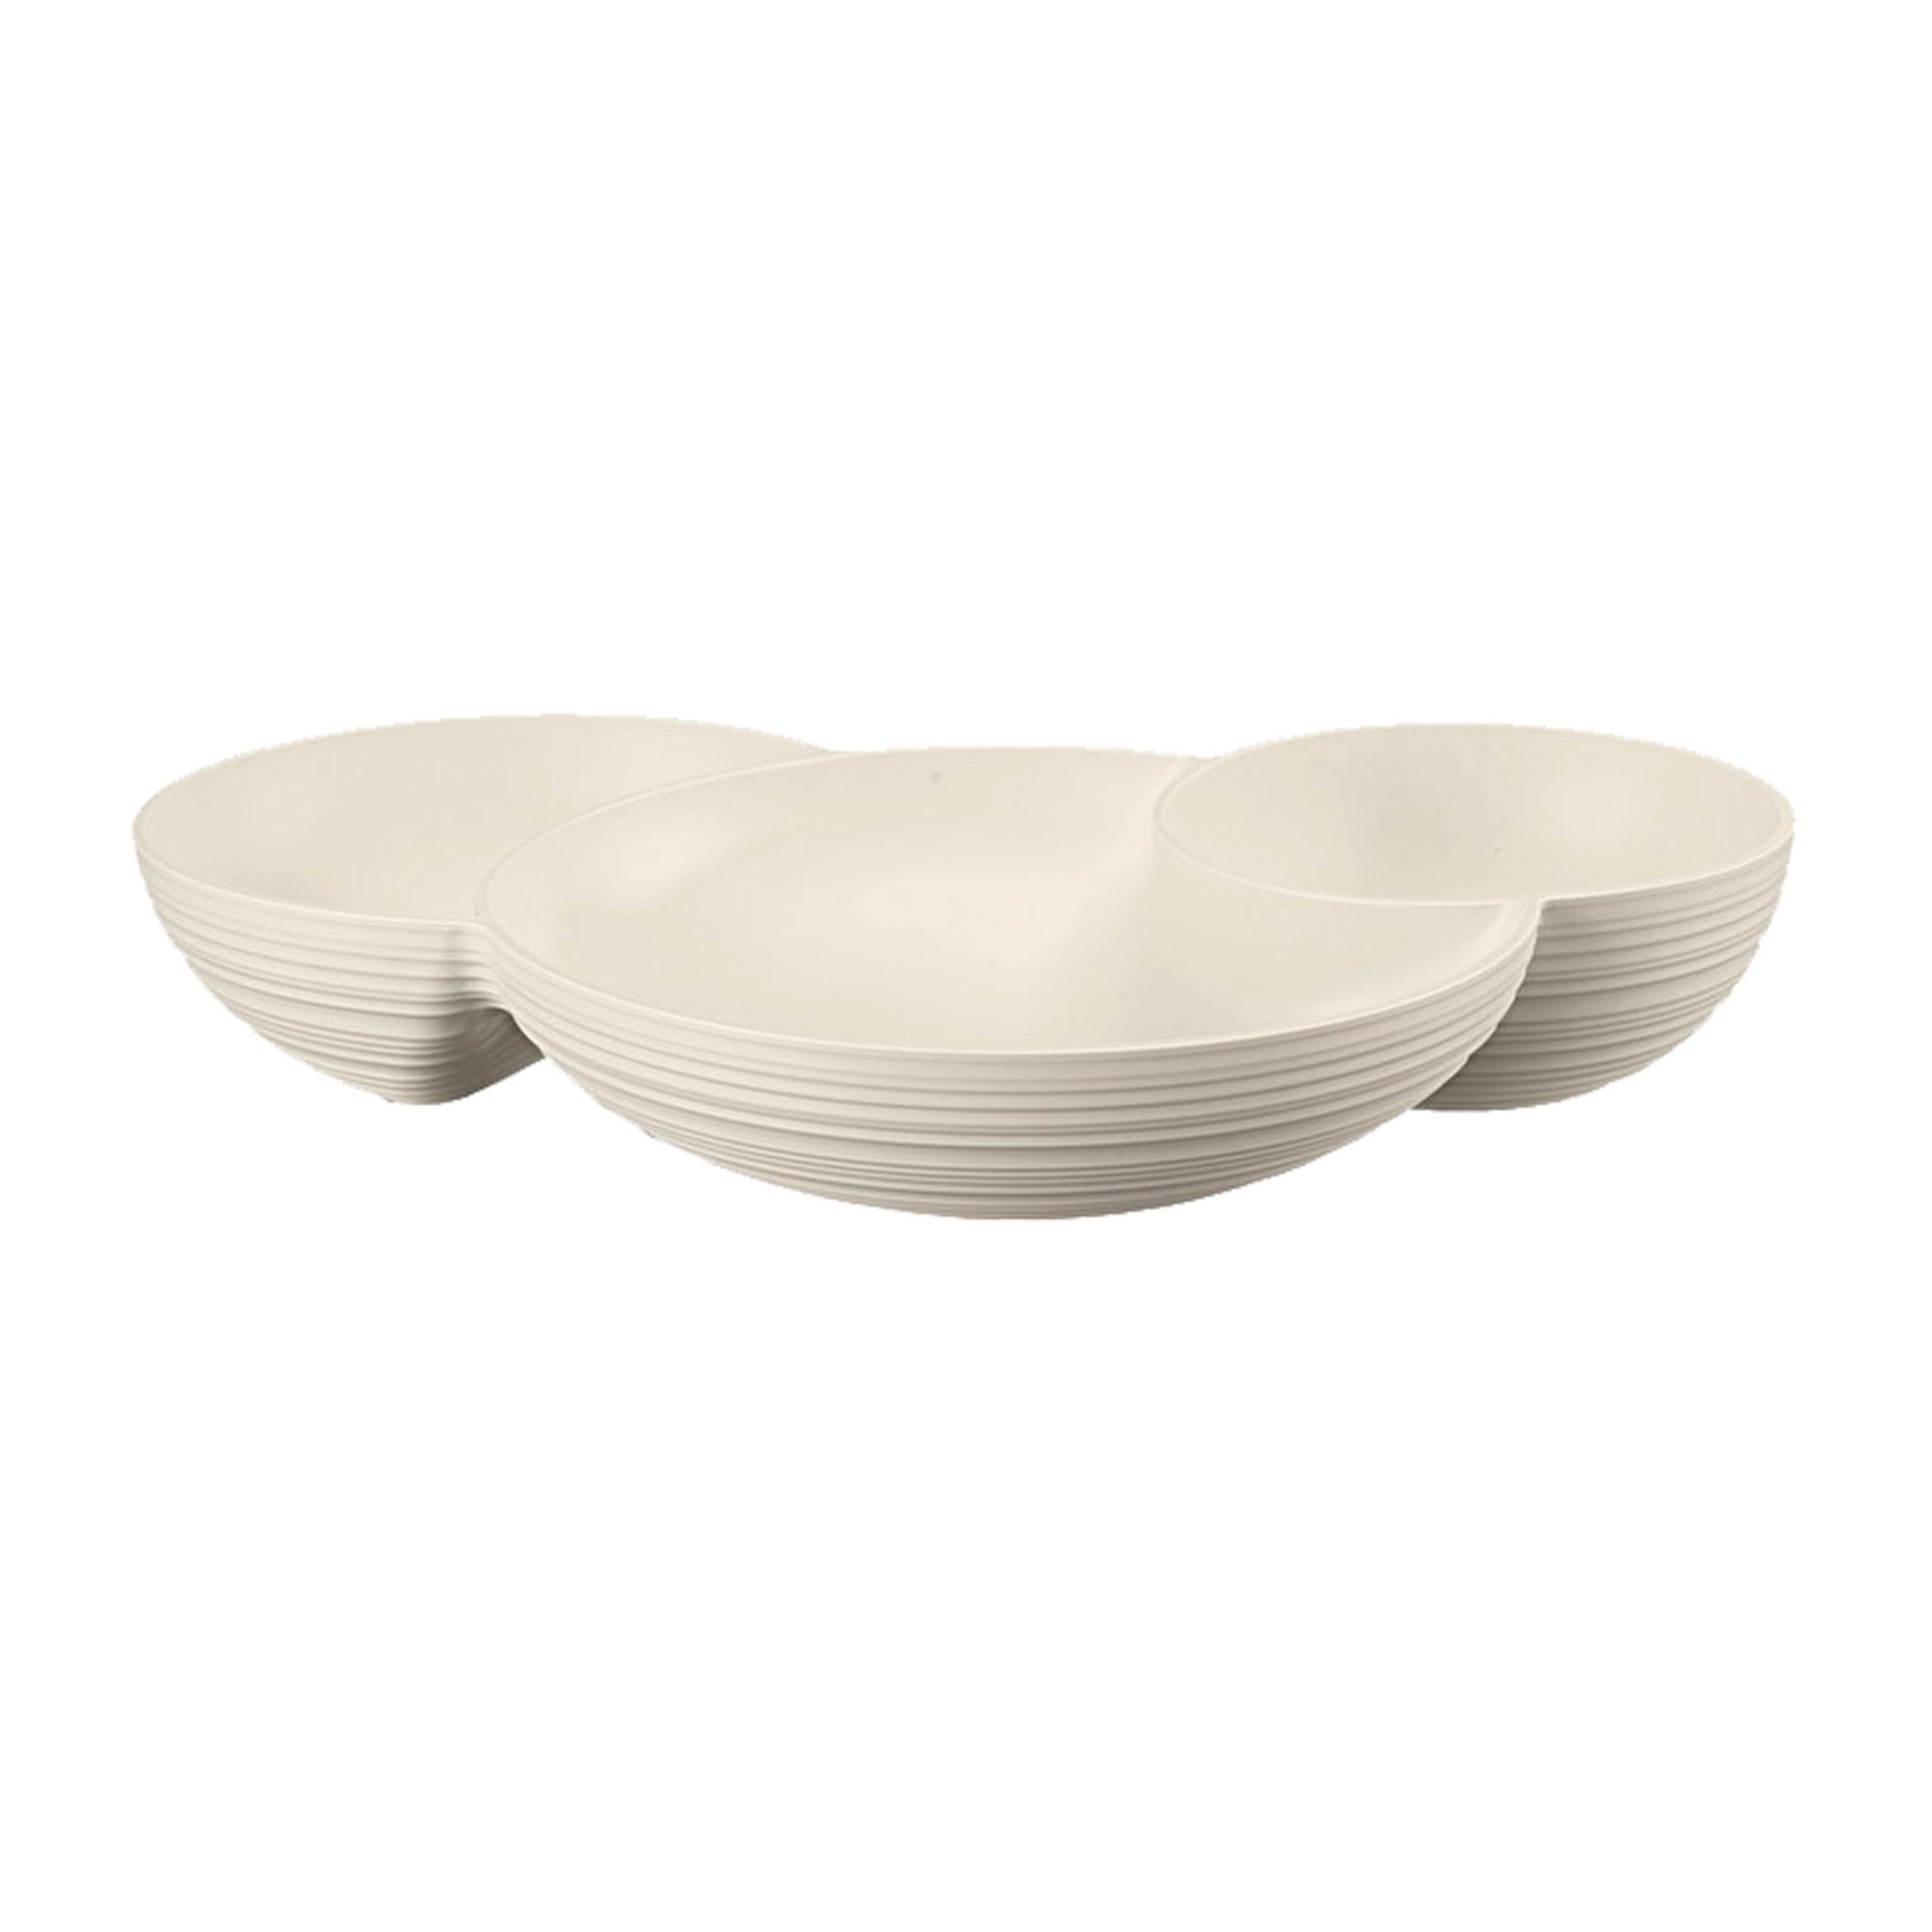 Guzzini Earth Tierra Hors D'oeuvres Serving Dish White Image 1